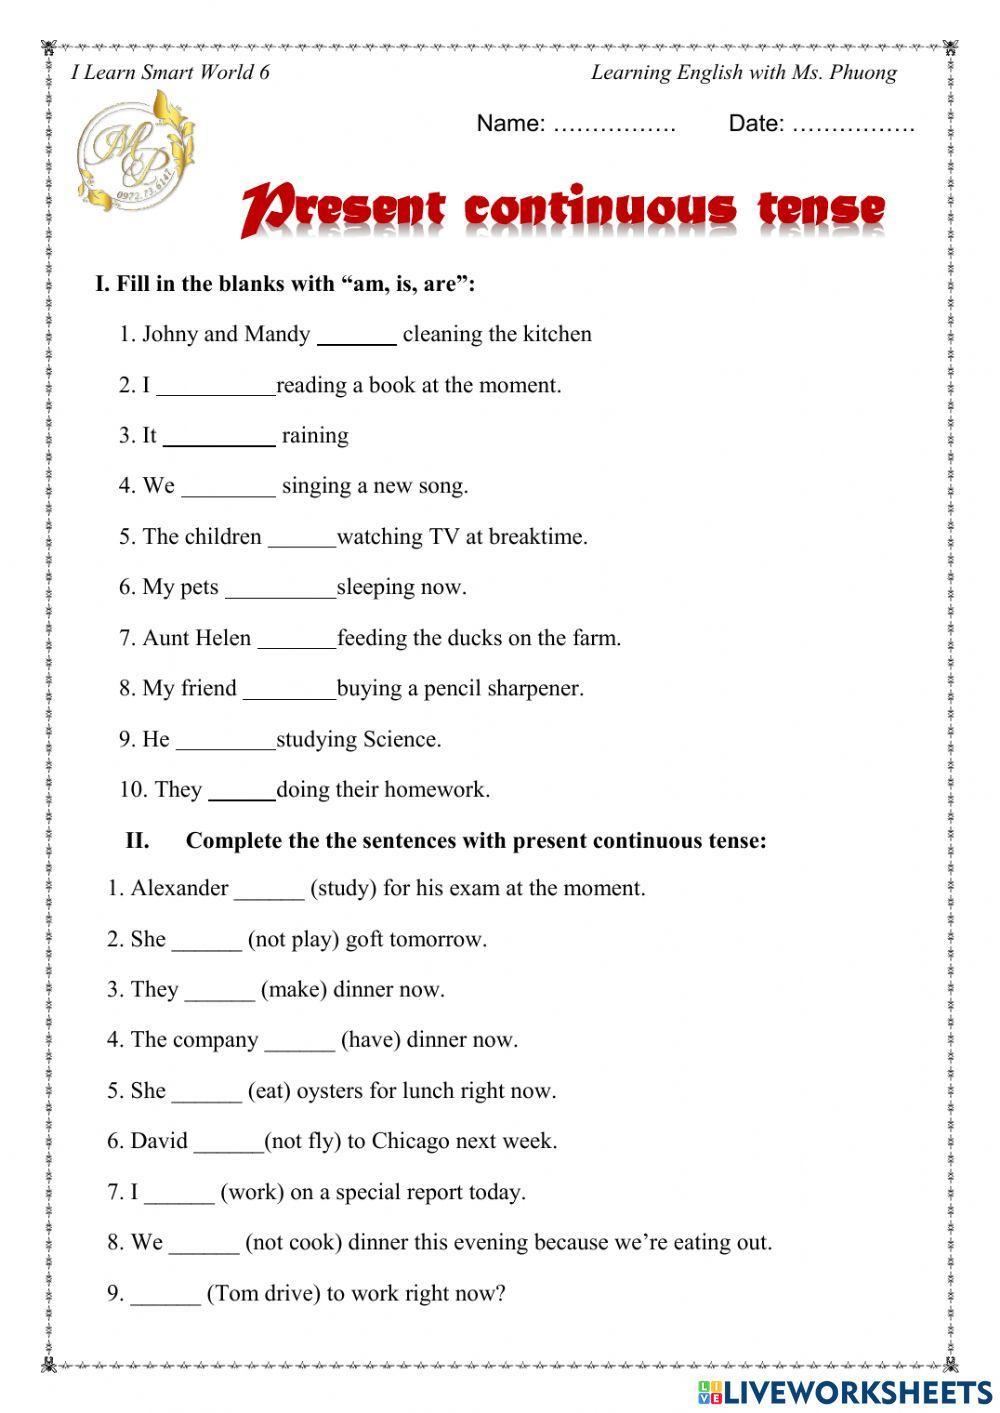 Present continuous tense online exercise for Grade 6 | Live Worksheets